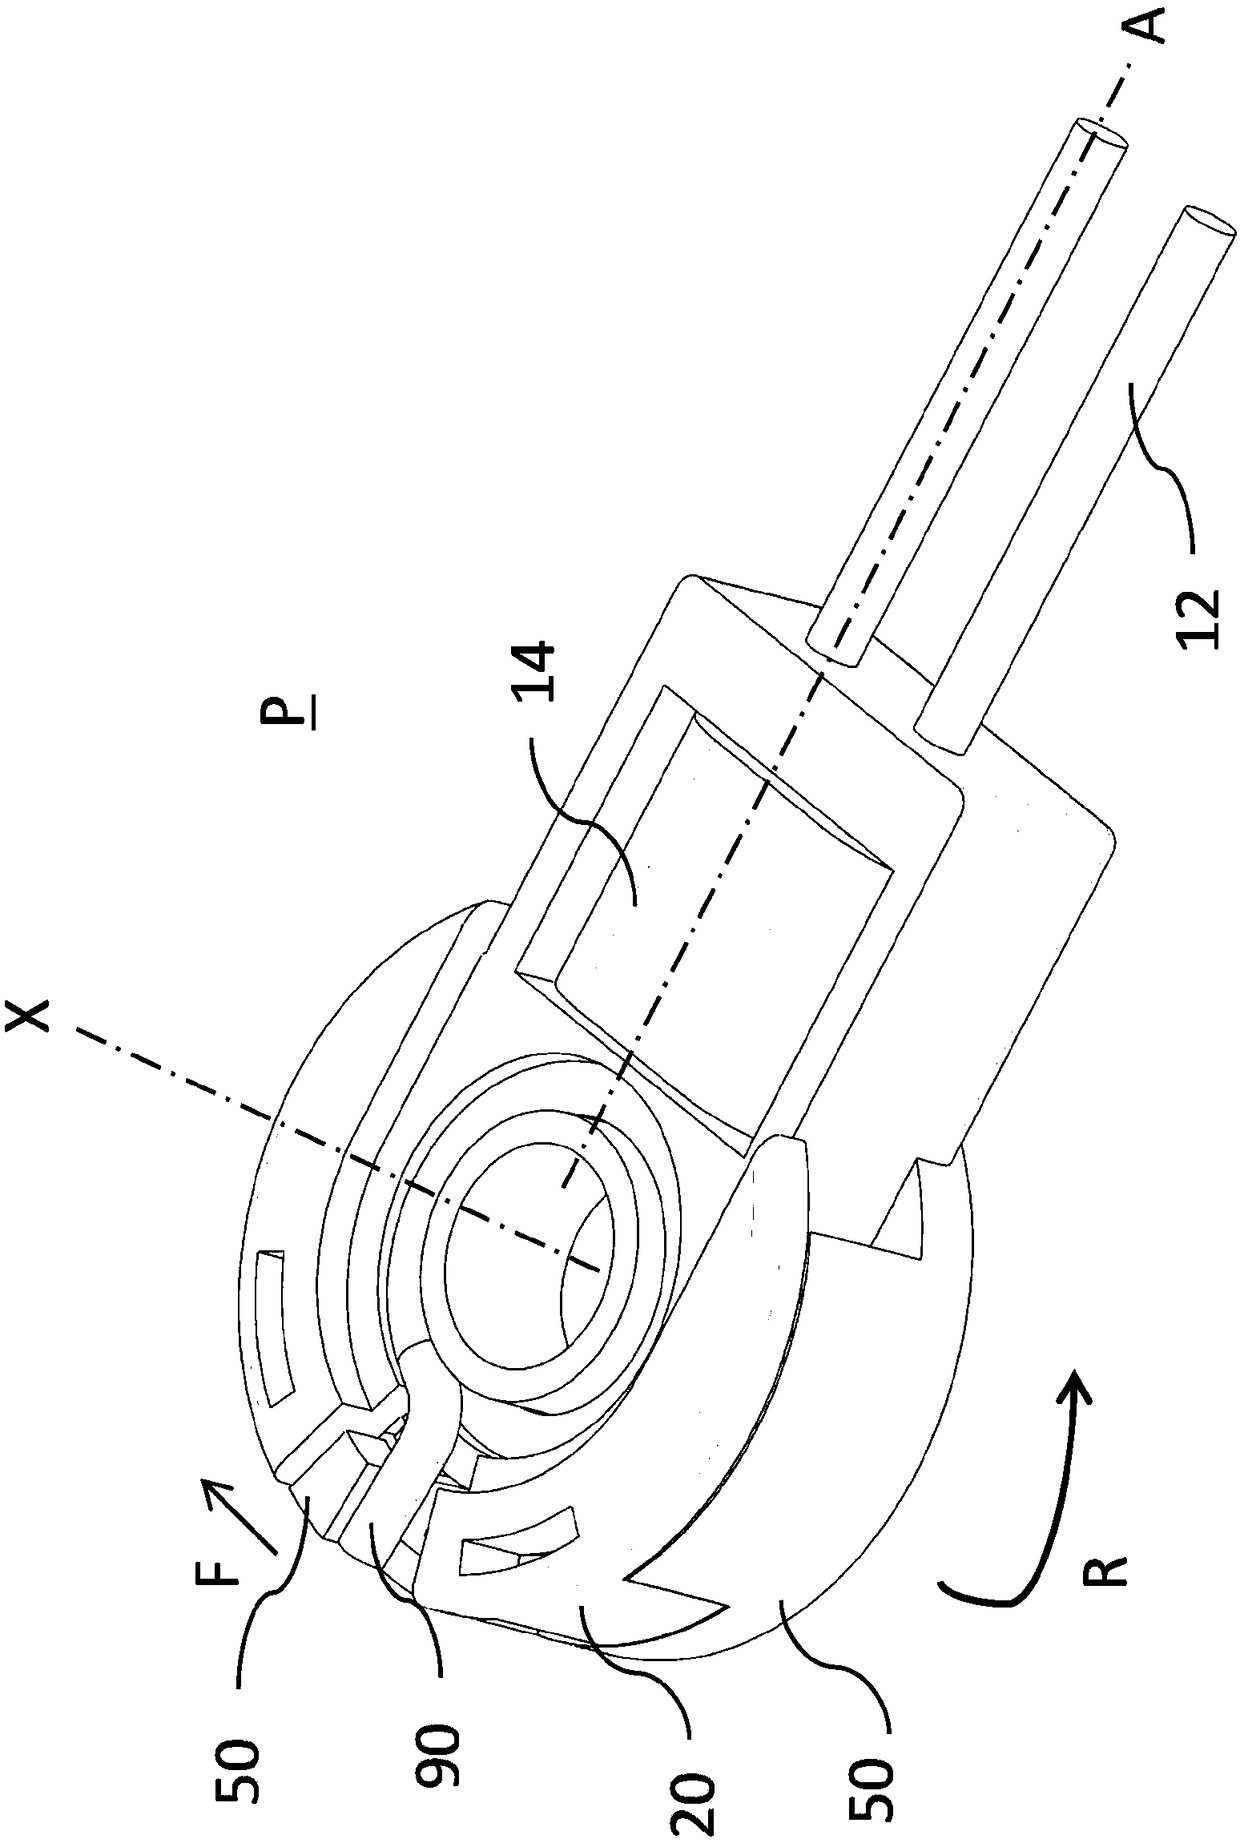 Electric connector assembly